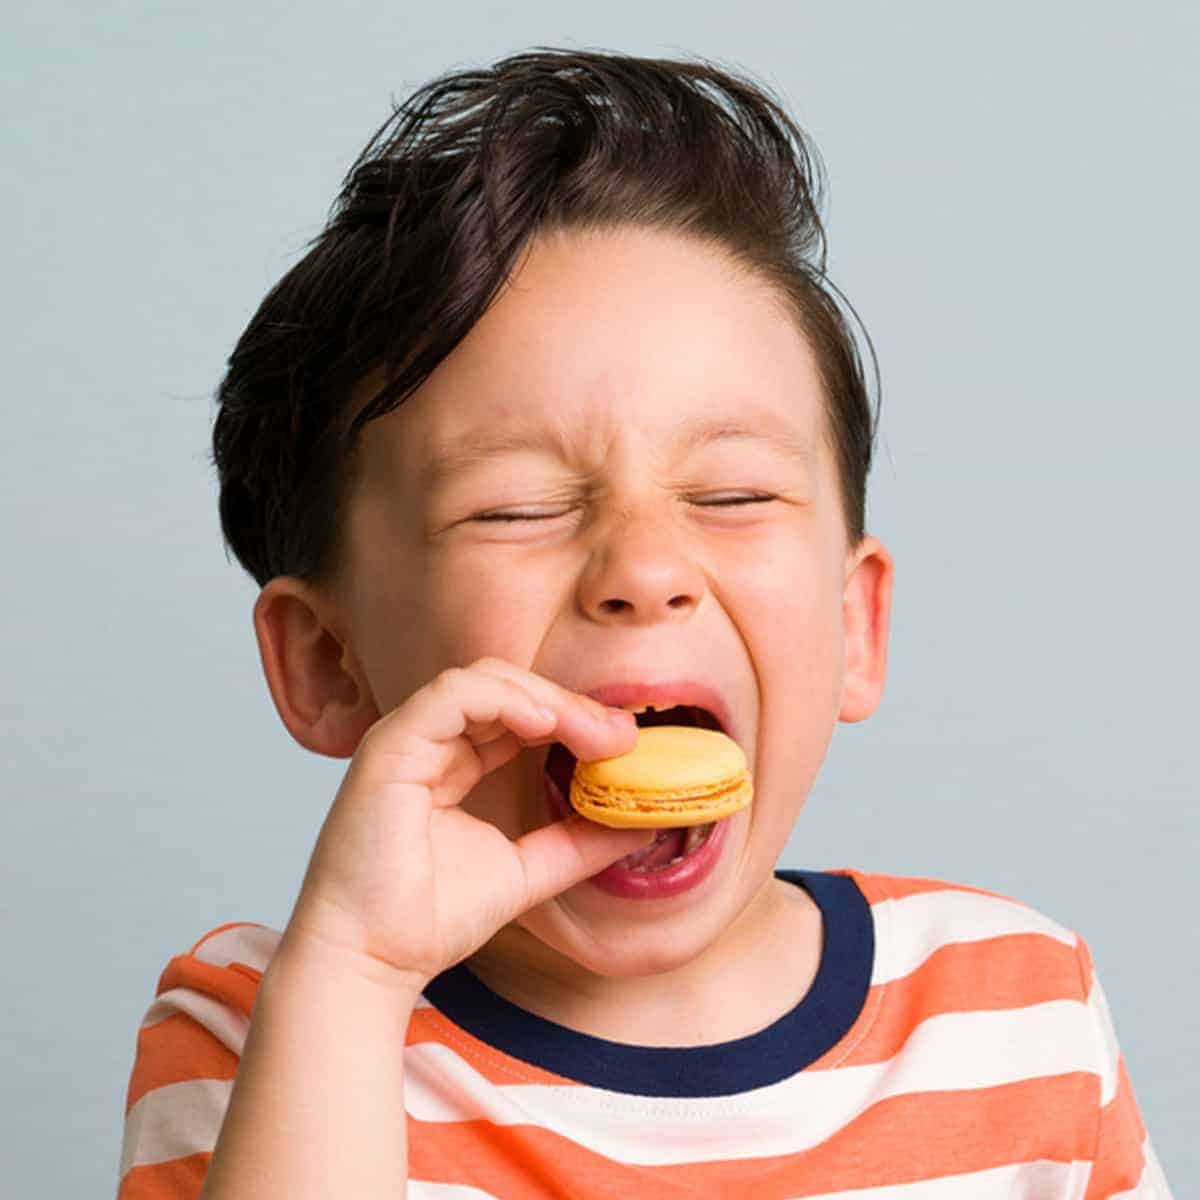 Learn how to use the division of responsibility to help improve picky eating, whether you have a toddler, kid, or teen. Plus, strategies to implement this picky eating strategy.